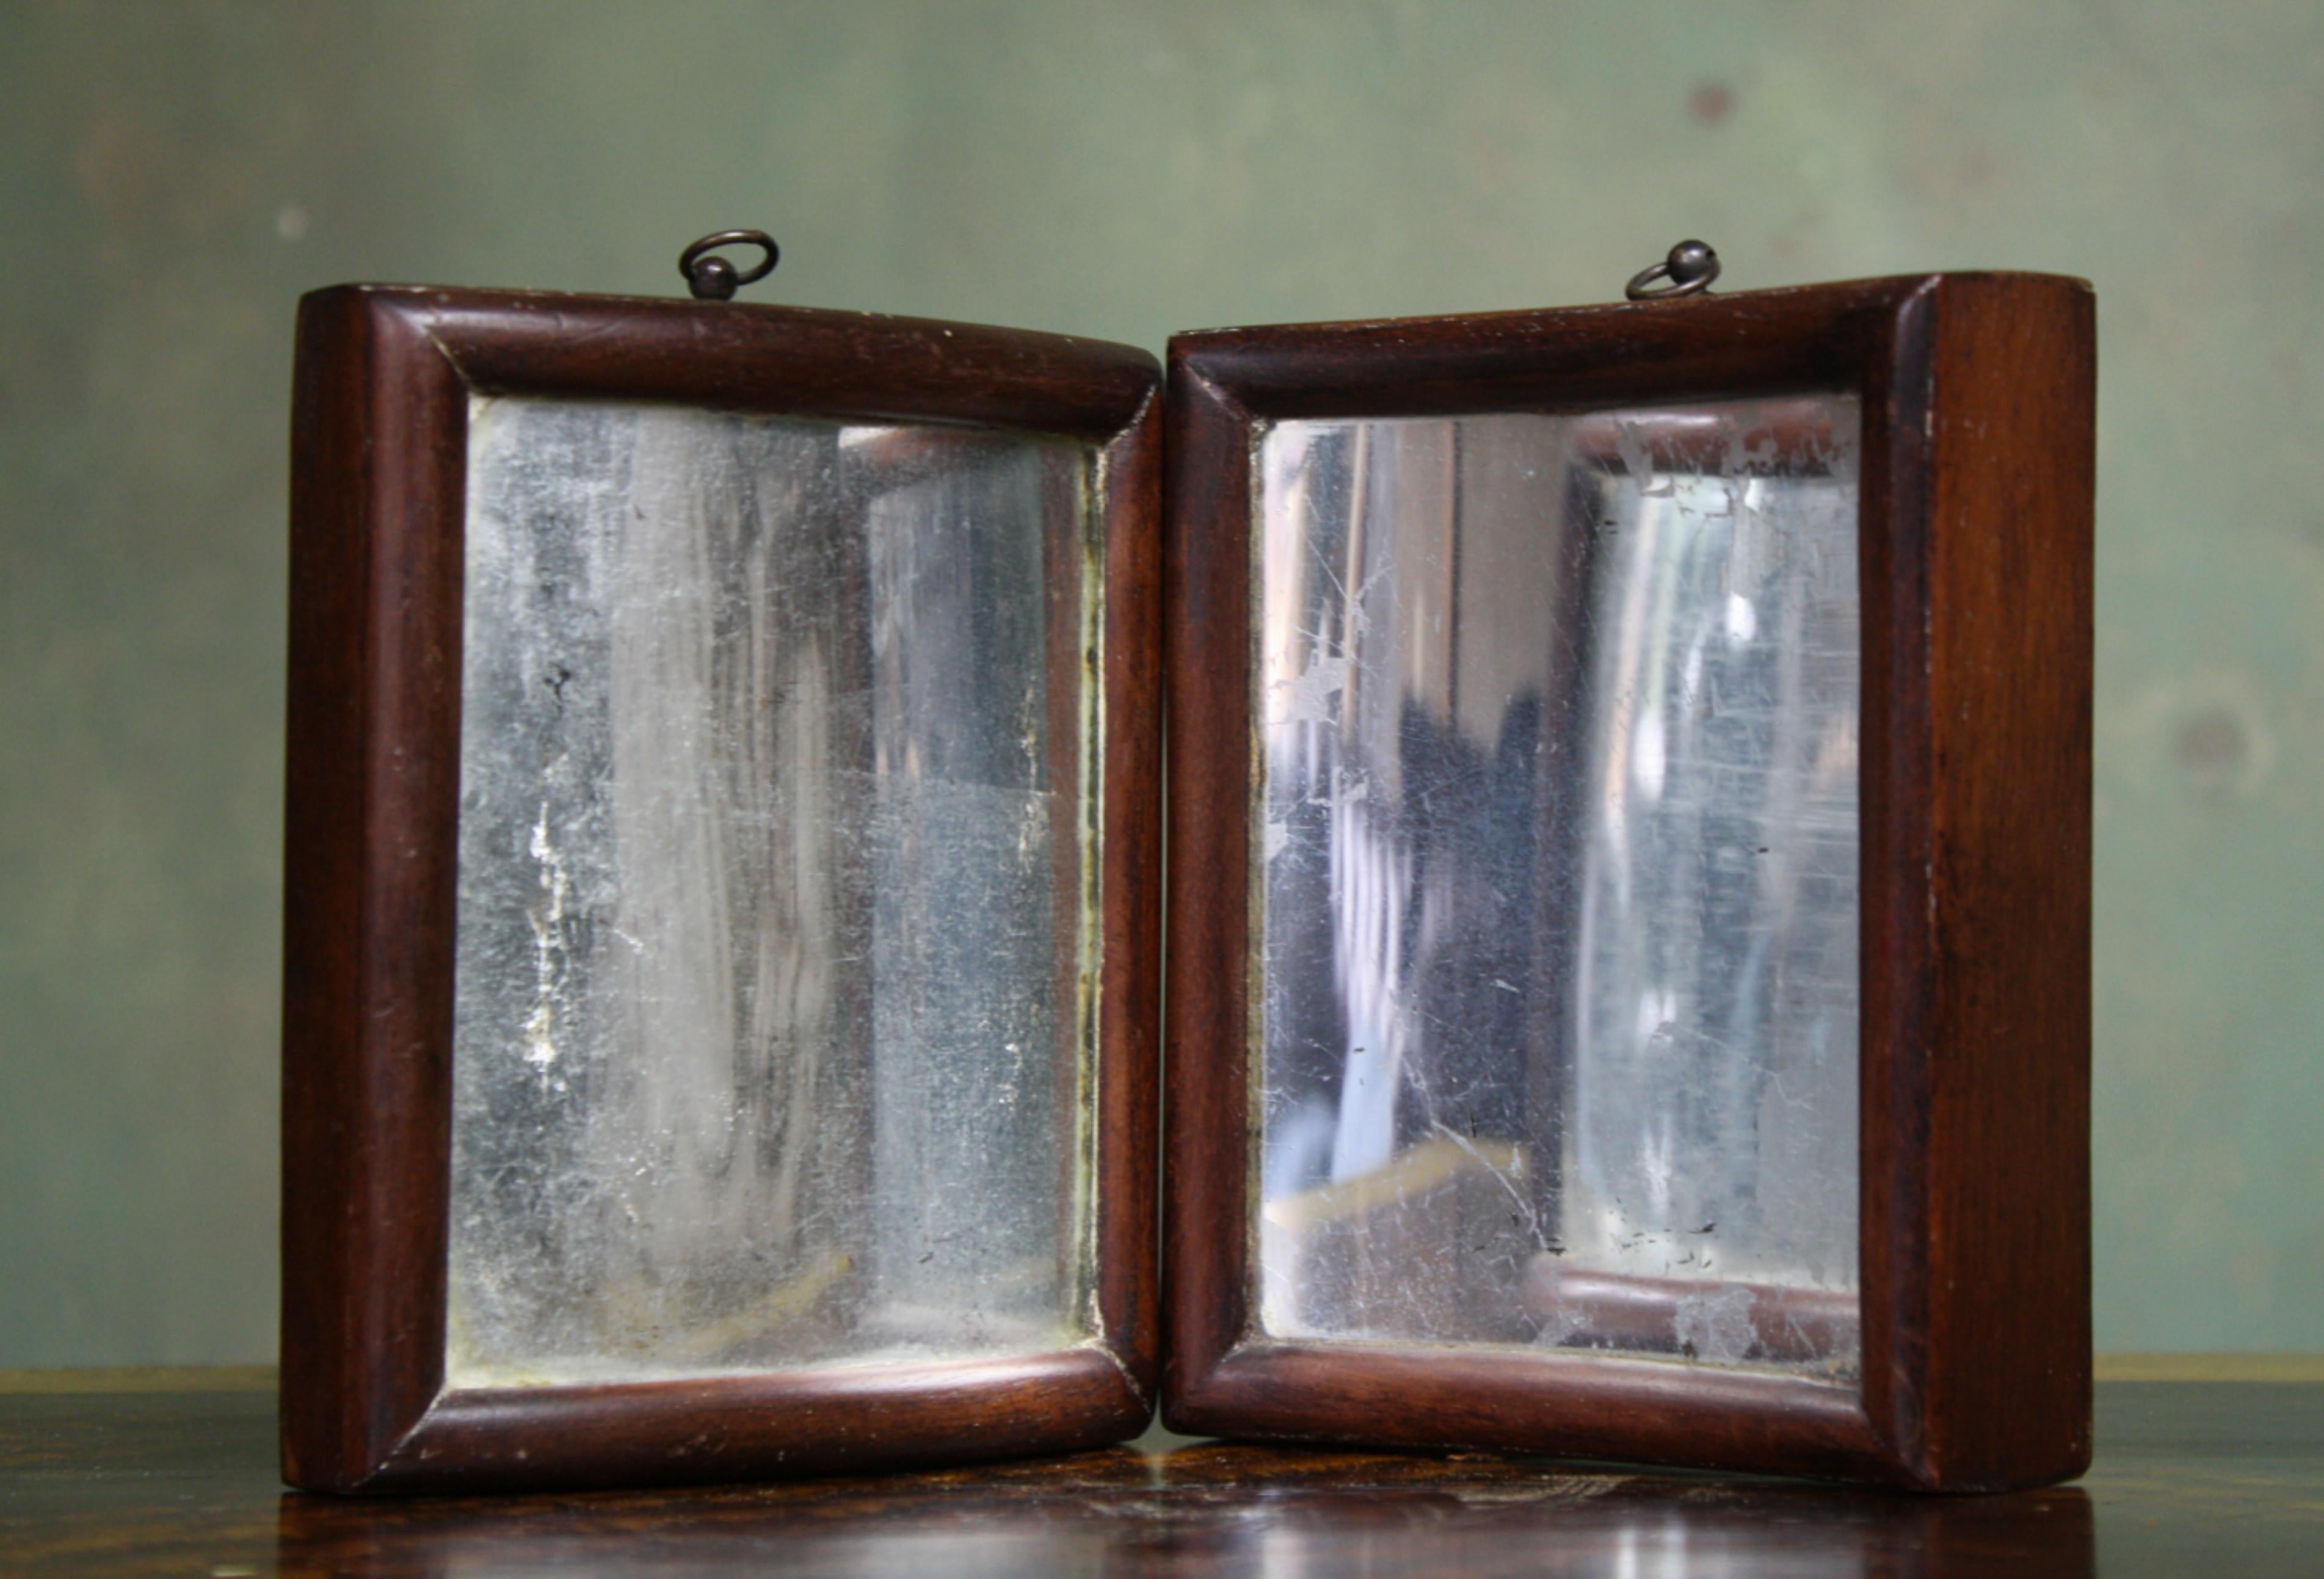 A very unusual pair of petite distortion mirrors, encased within their original oak frames with oxidised mirror plates, one mirror has a convex mirror plate the second a concave plate.

English in origin, early to mid 19th century in age 

These